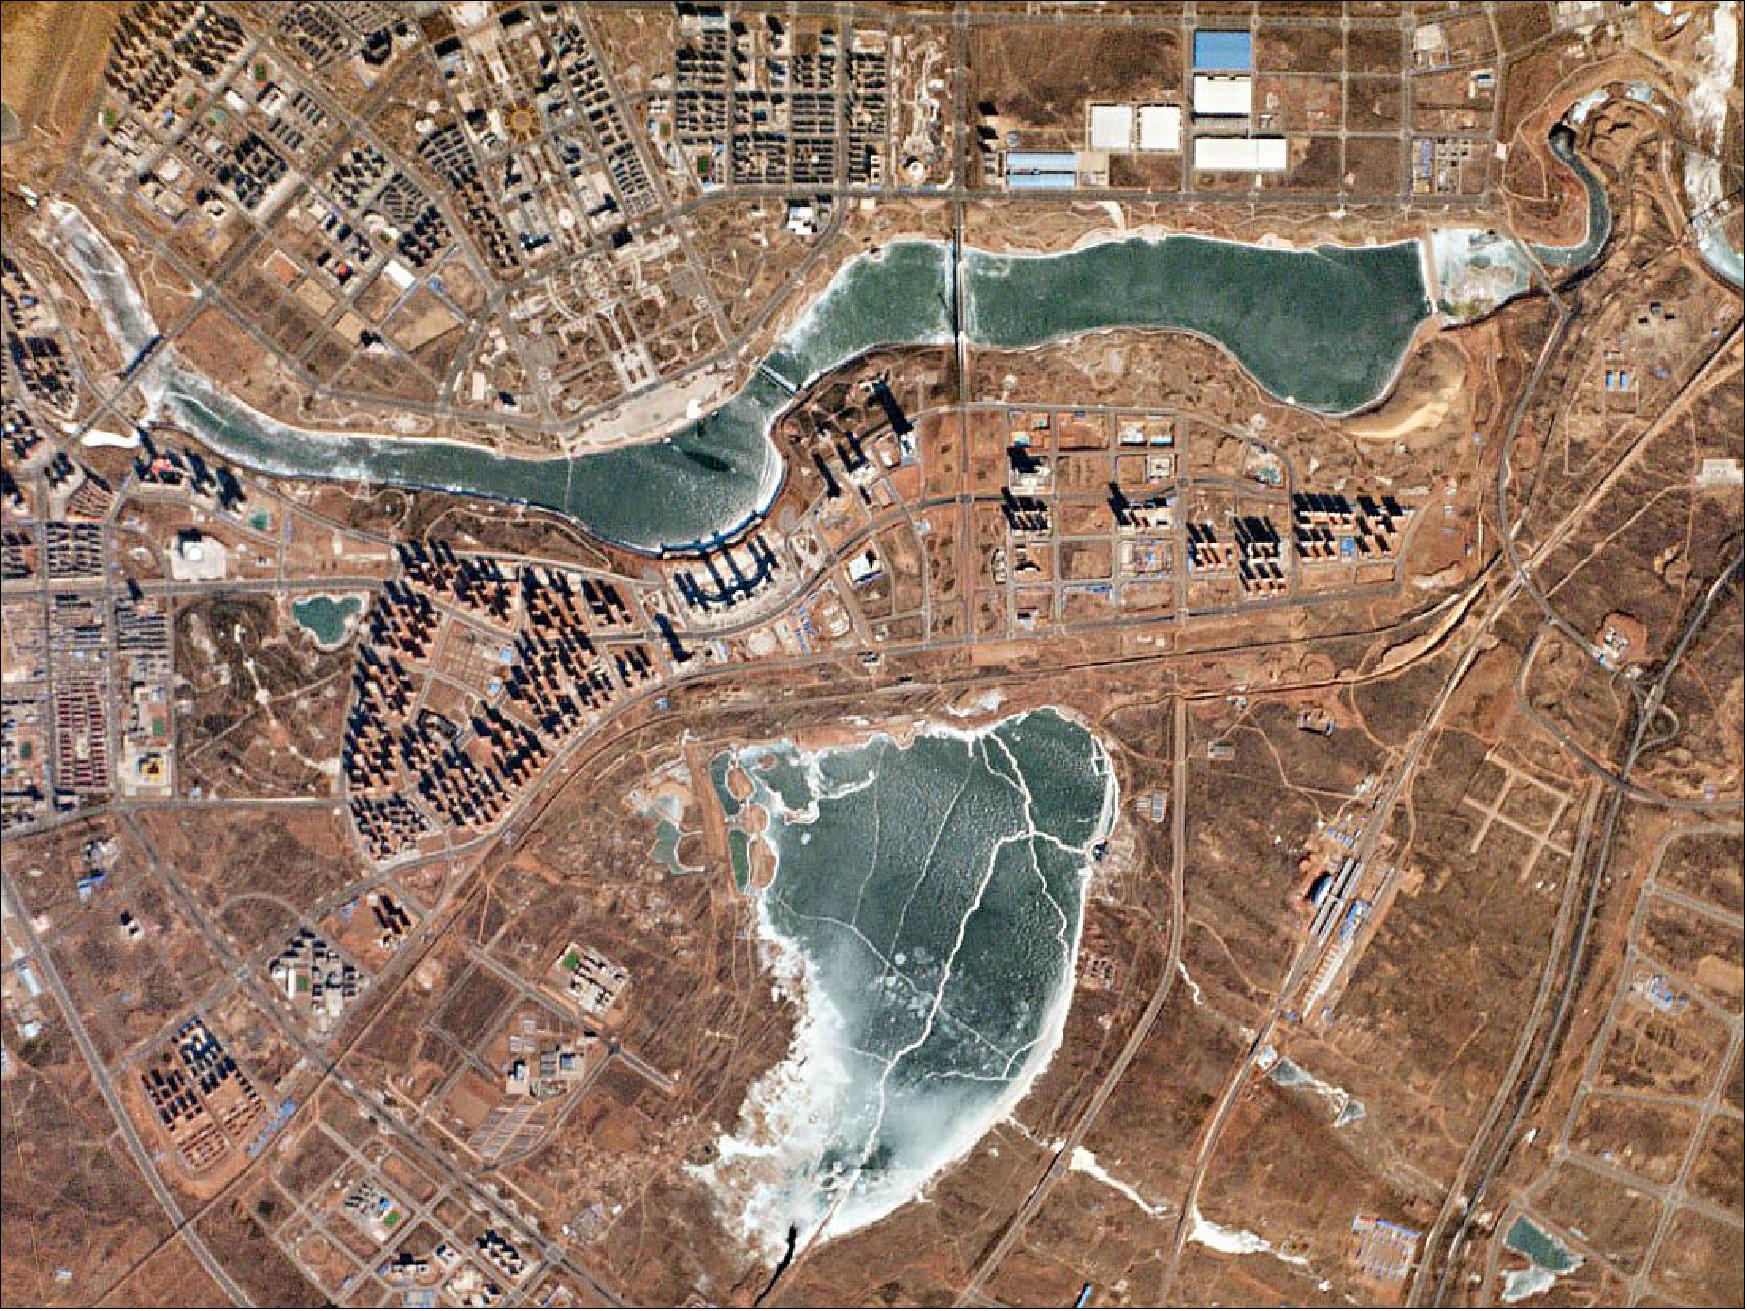 Figure 48: This Flock 1 image, acquired 24 January 2015, shows the city of Ordos in Inner Mongolia, China (image credit: Planet Labs)